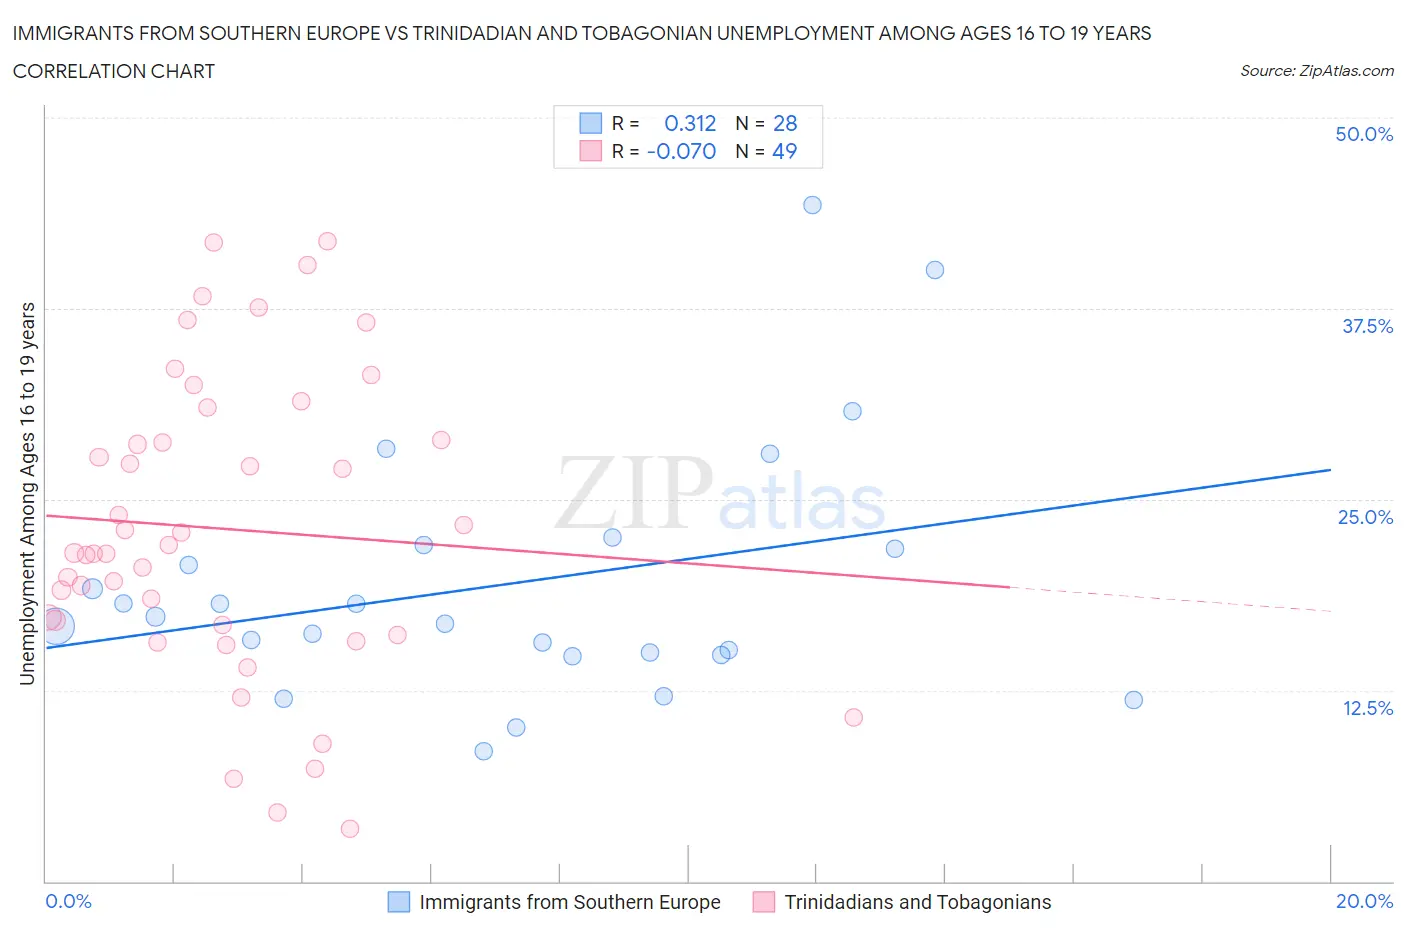 Immigrants from Southern Europe vs Trinidadian and Tobagonian Unemployment Among Ages 16 to 19 years